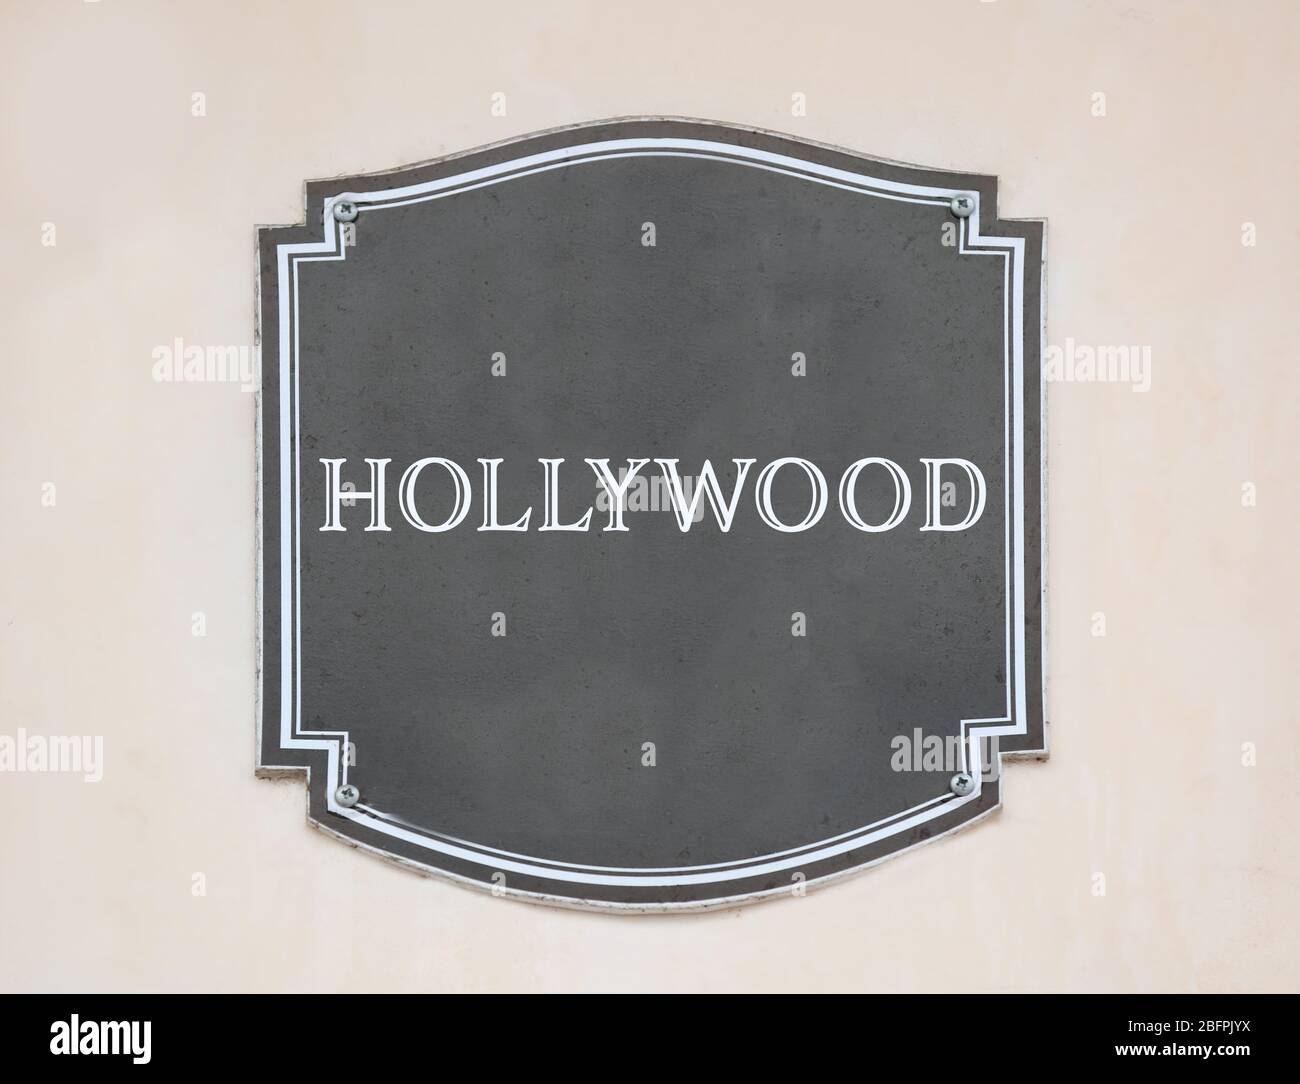 HOLLYWOOD signpost on wall. Travel USA concept Stock Photo